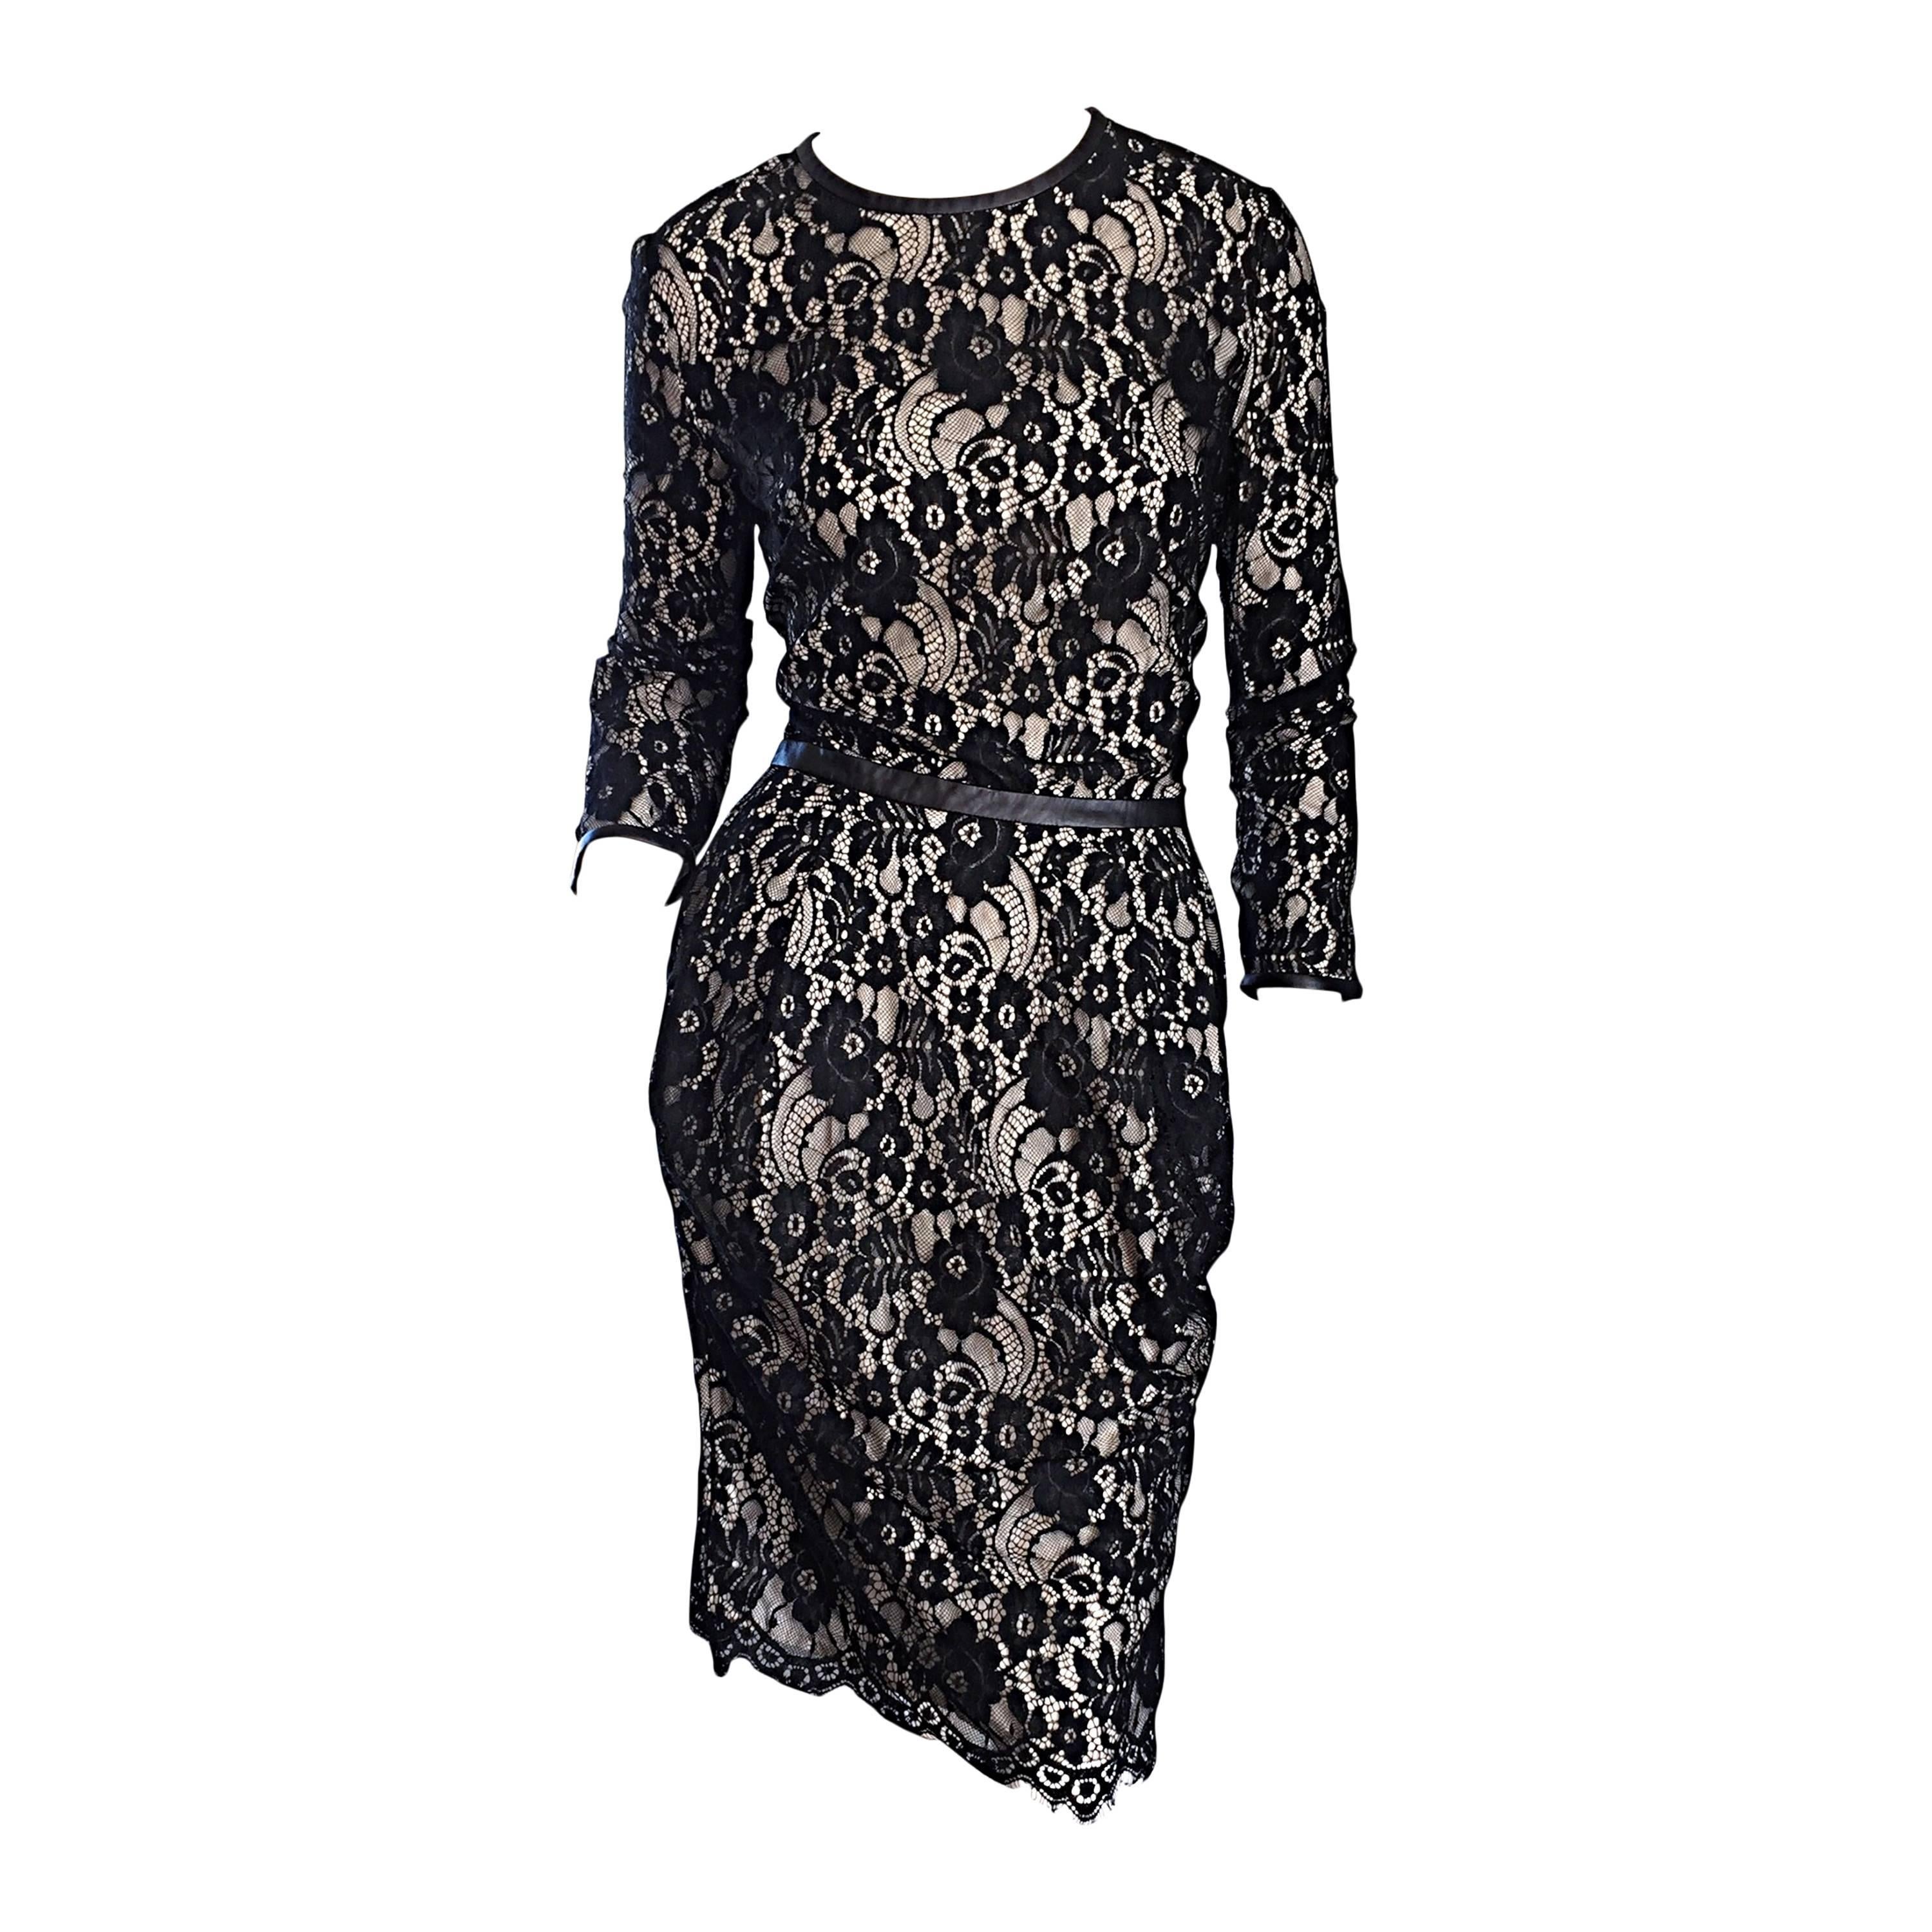 Narcisco Rodriguez Black + Nude French Lace Dress w/ Leather Accents 